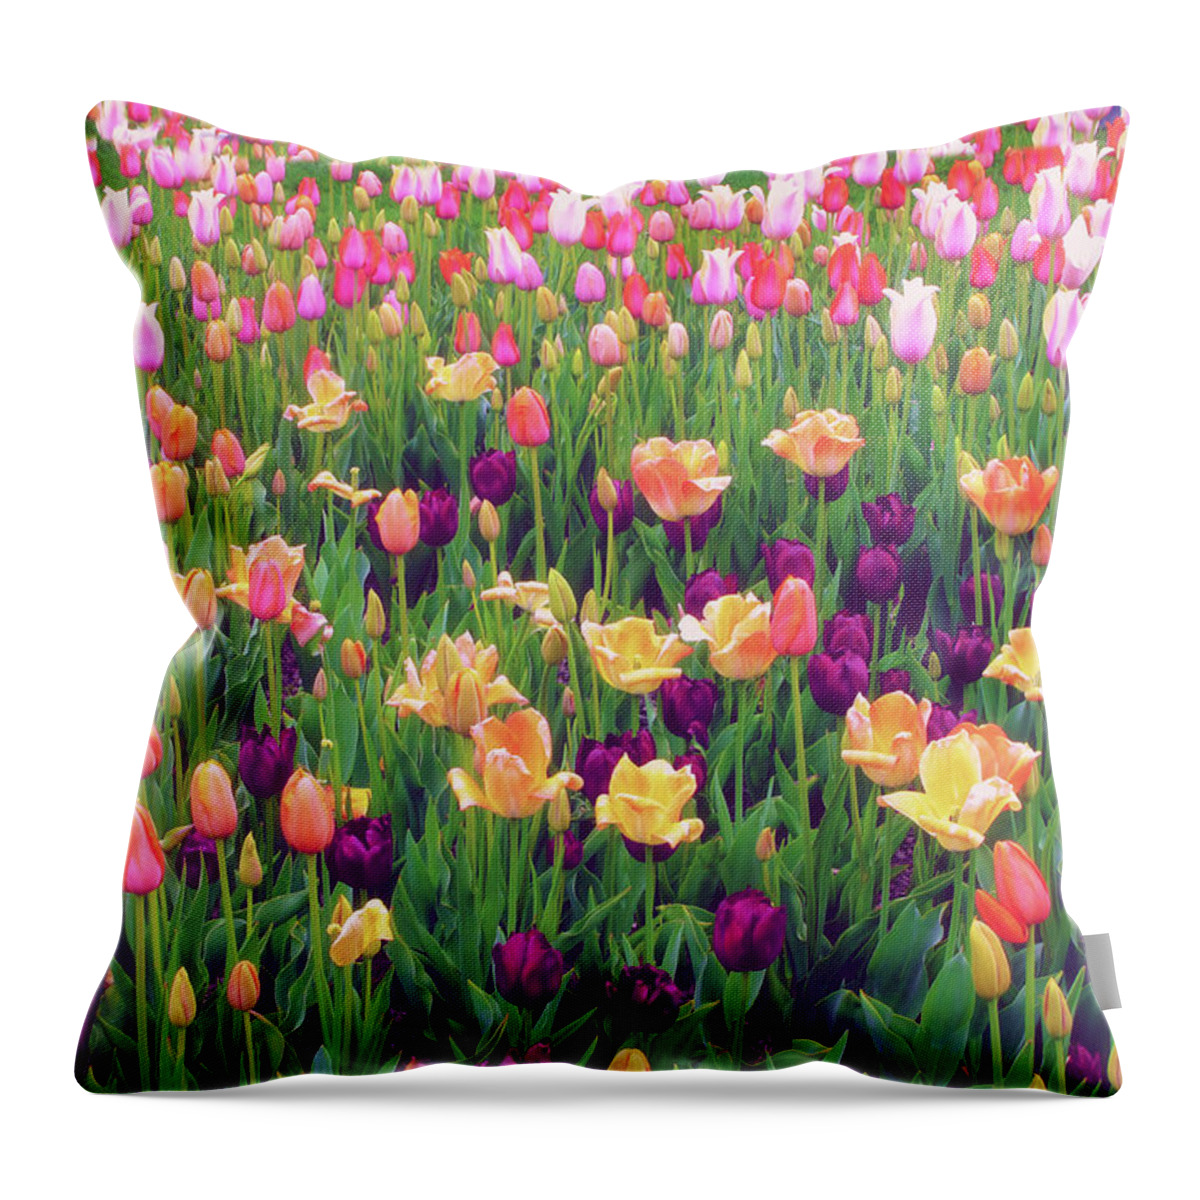 Flowers Throw Pillow featuring the photograph Tulip Field by Jessica Jenney